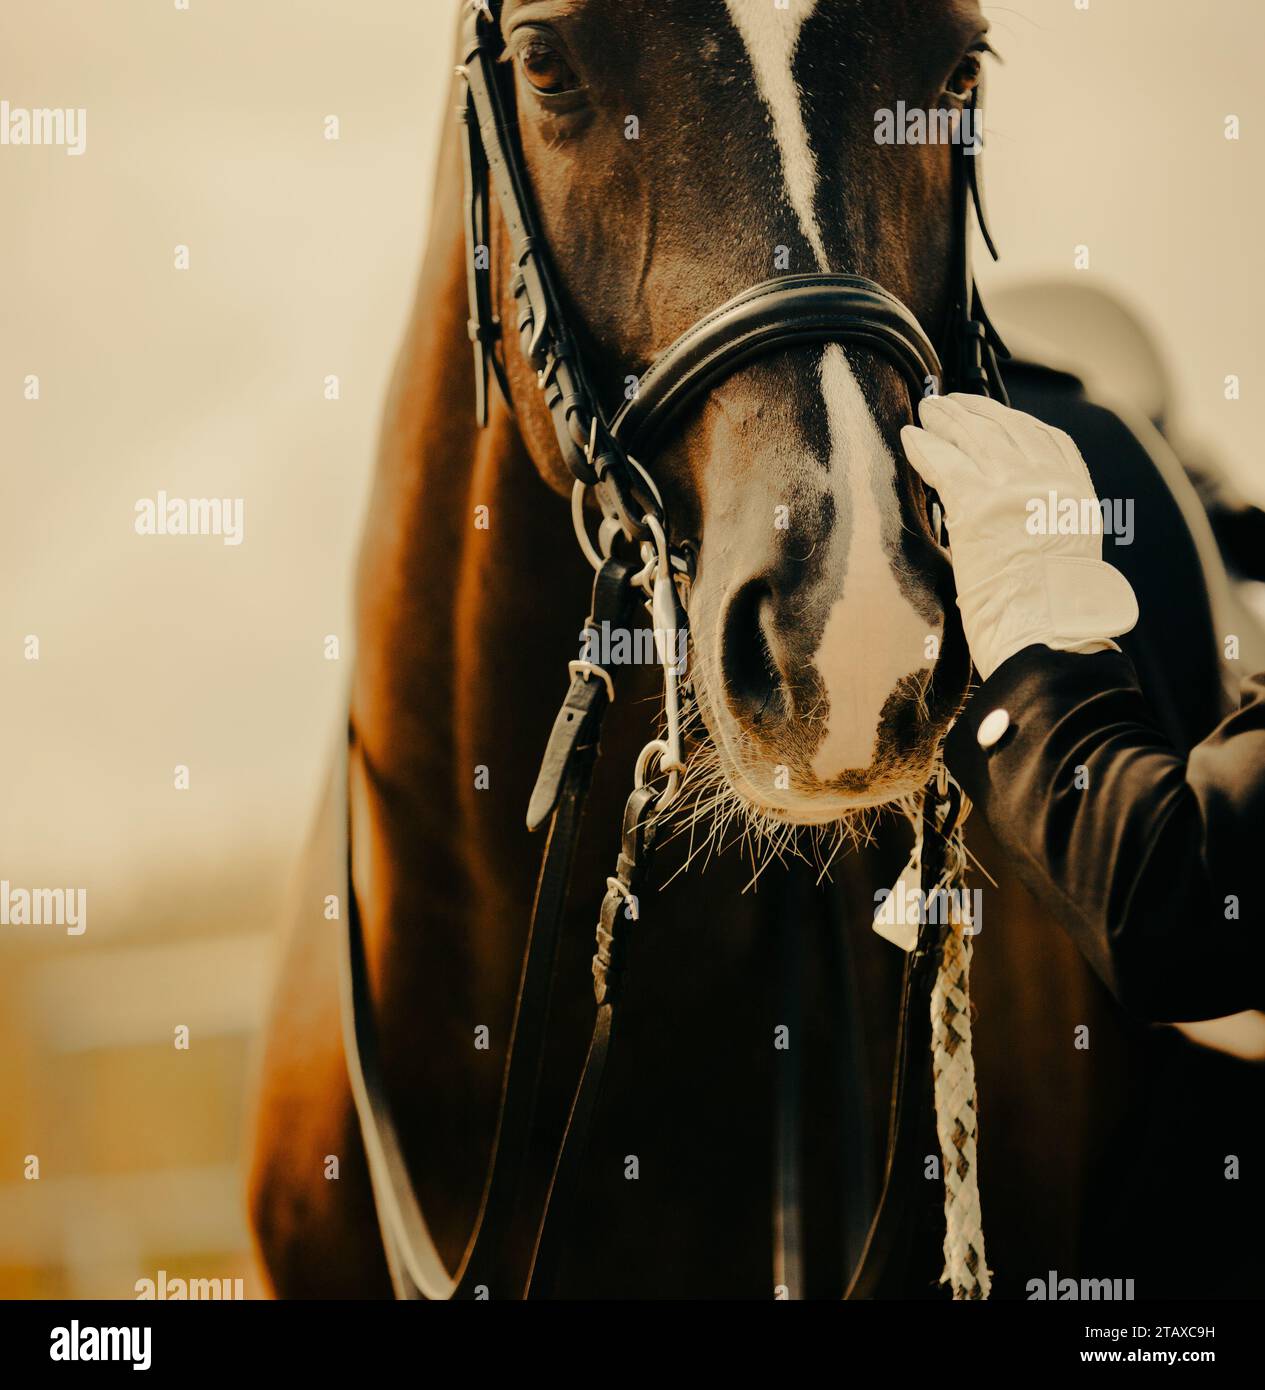 Portrait of a bay horse, which the rider puts a leather bridle on its muzzle. Equestrian sports and sports equipment. Dressage. Stock Photo